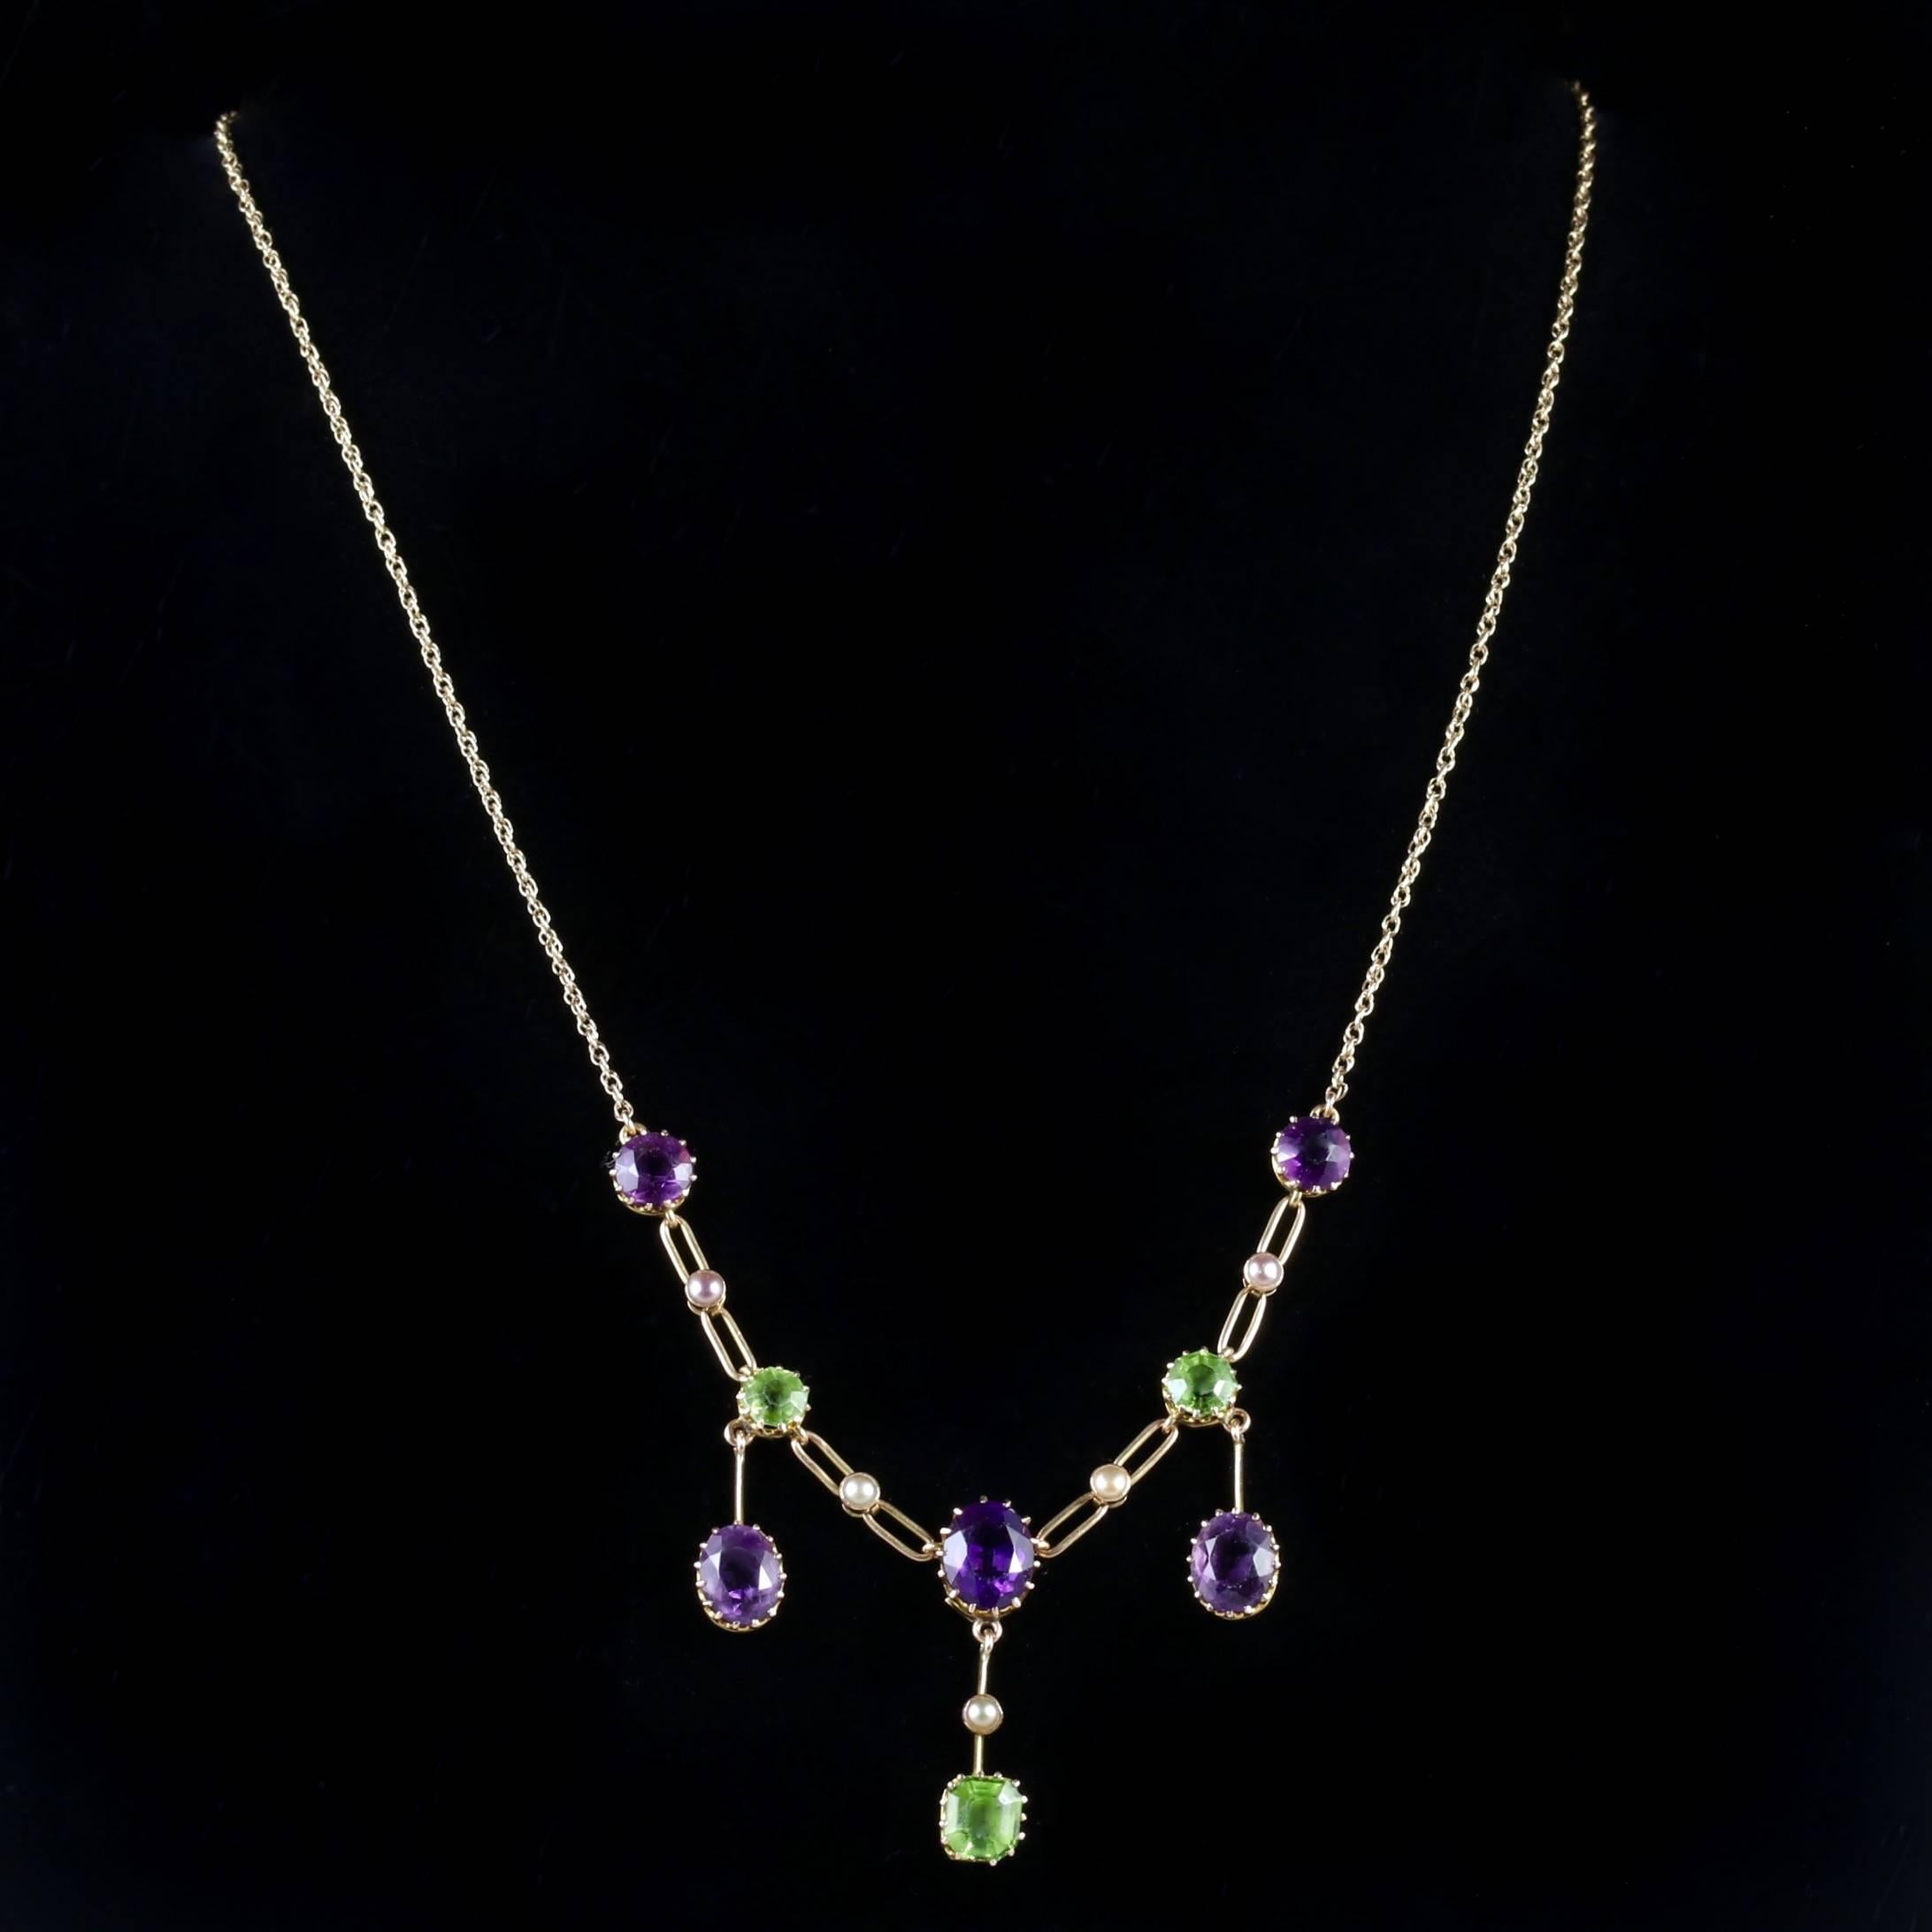 This spectacular Victorian suffragette necklace is set in 15ct and 9ct Gold, Circa 1900.

The necklace is all original and is adorned in large Amethysts, Peridots and Pearls.

The chain has a link effect with Pearls set into the gallery of the